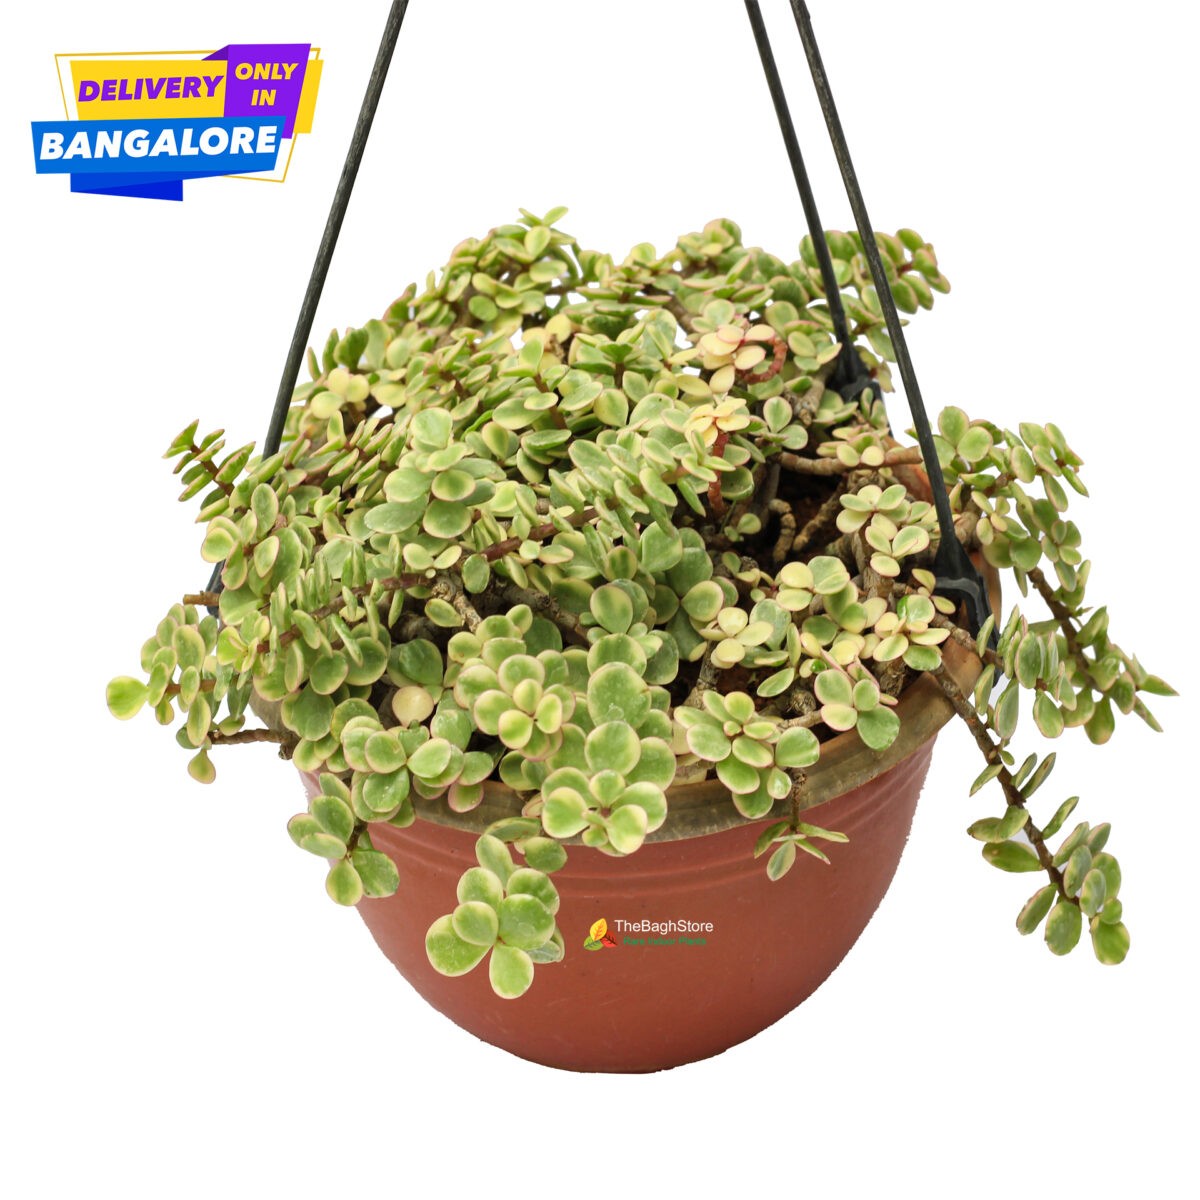 Hanging Variegated Jade plant indoor bangalore delivery